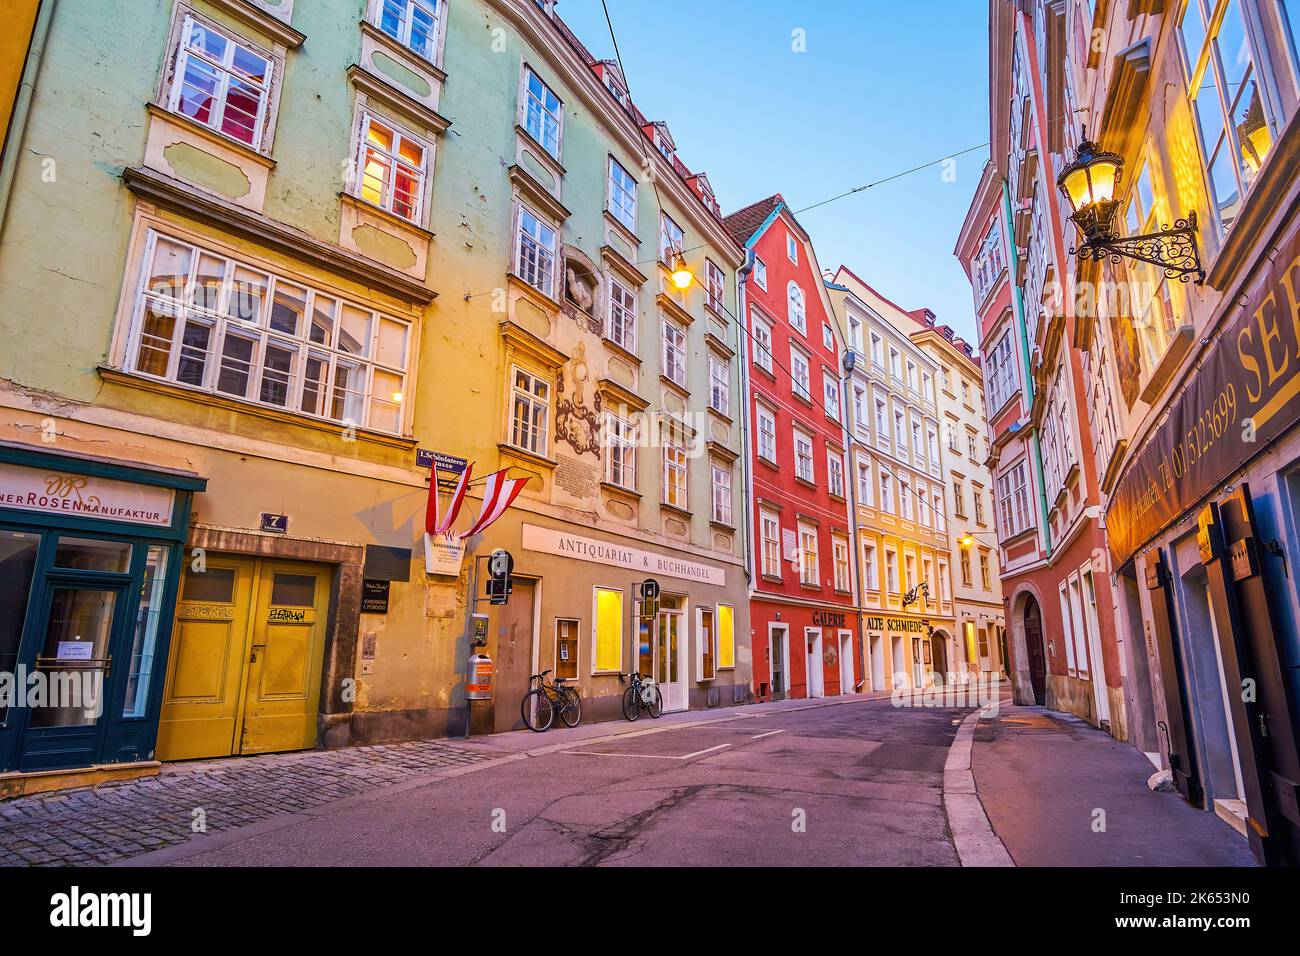 VIENNA, AUSTRIA - FEBRUARY 17, 2019: The evening walk along curved Schonlaterngasse street with colorful medieval townhouses, on February 17 in Vienna Stock Photo